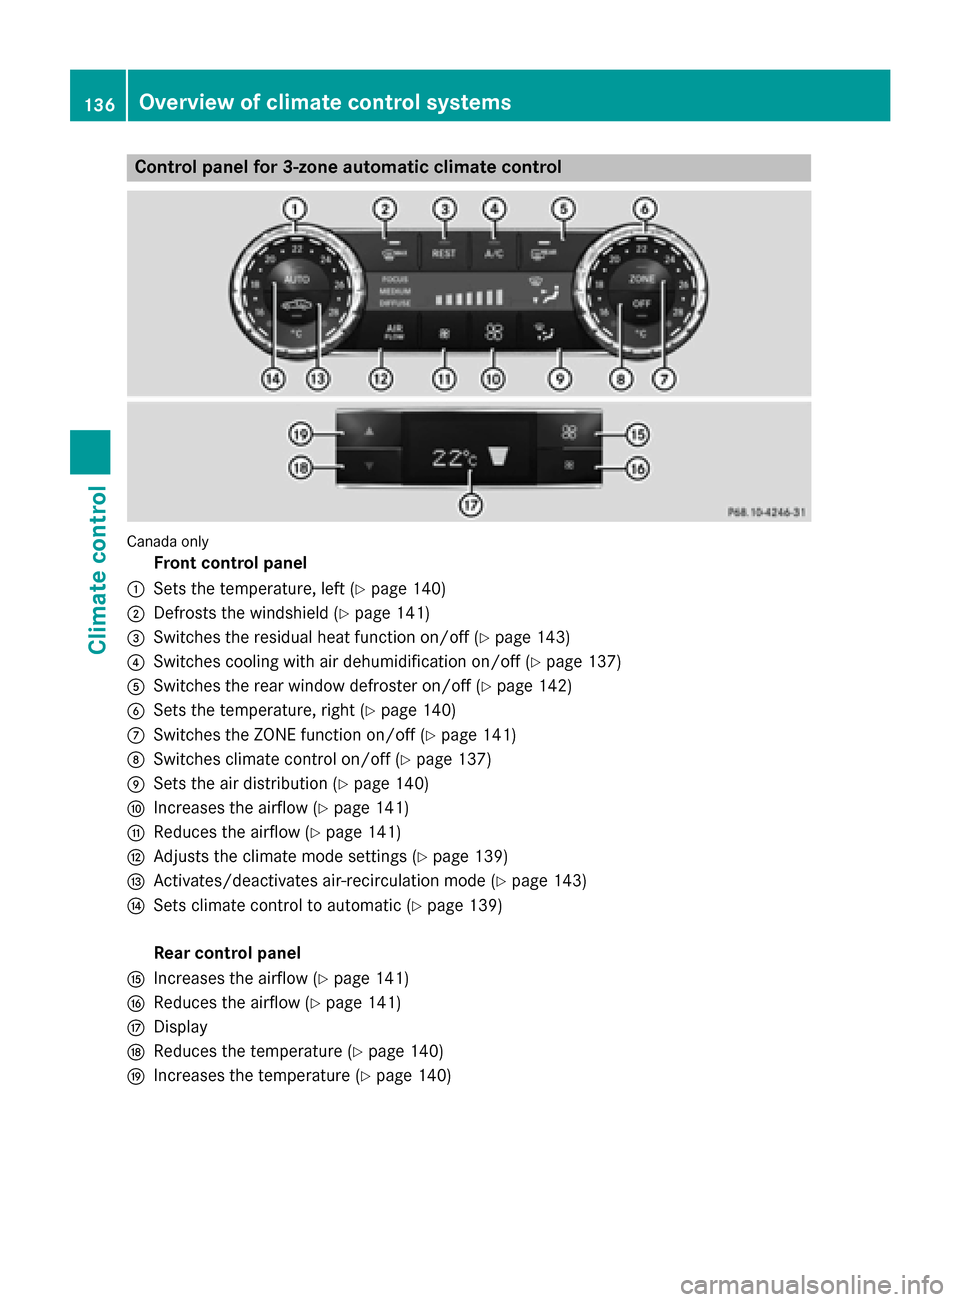 MERCEDES-BENZ GLK-Class 2015 X204 User Guide Control panel for 3-zone automatic climate control
Canada only
Front control panel
0043 Sets the temperature, left (Y page 140)
0044 Defrosts the windshield (Y page 141)
0087 Switches the residual hea